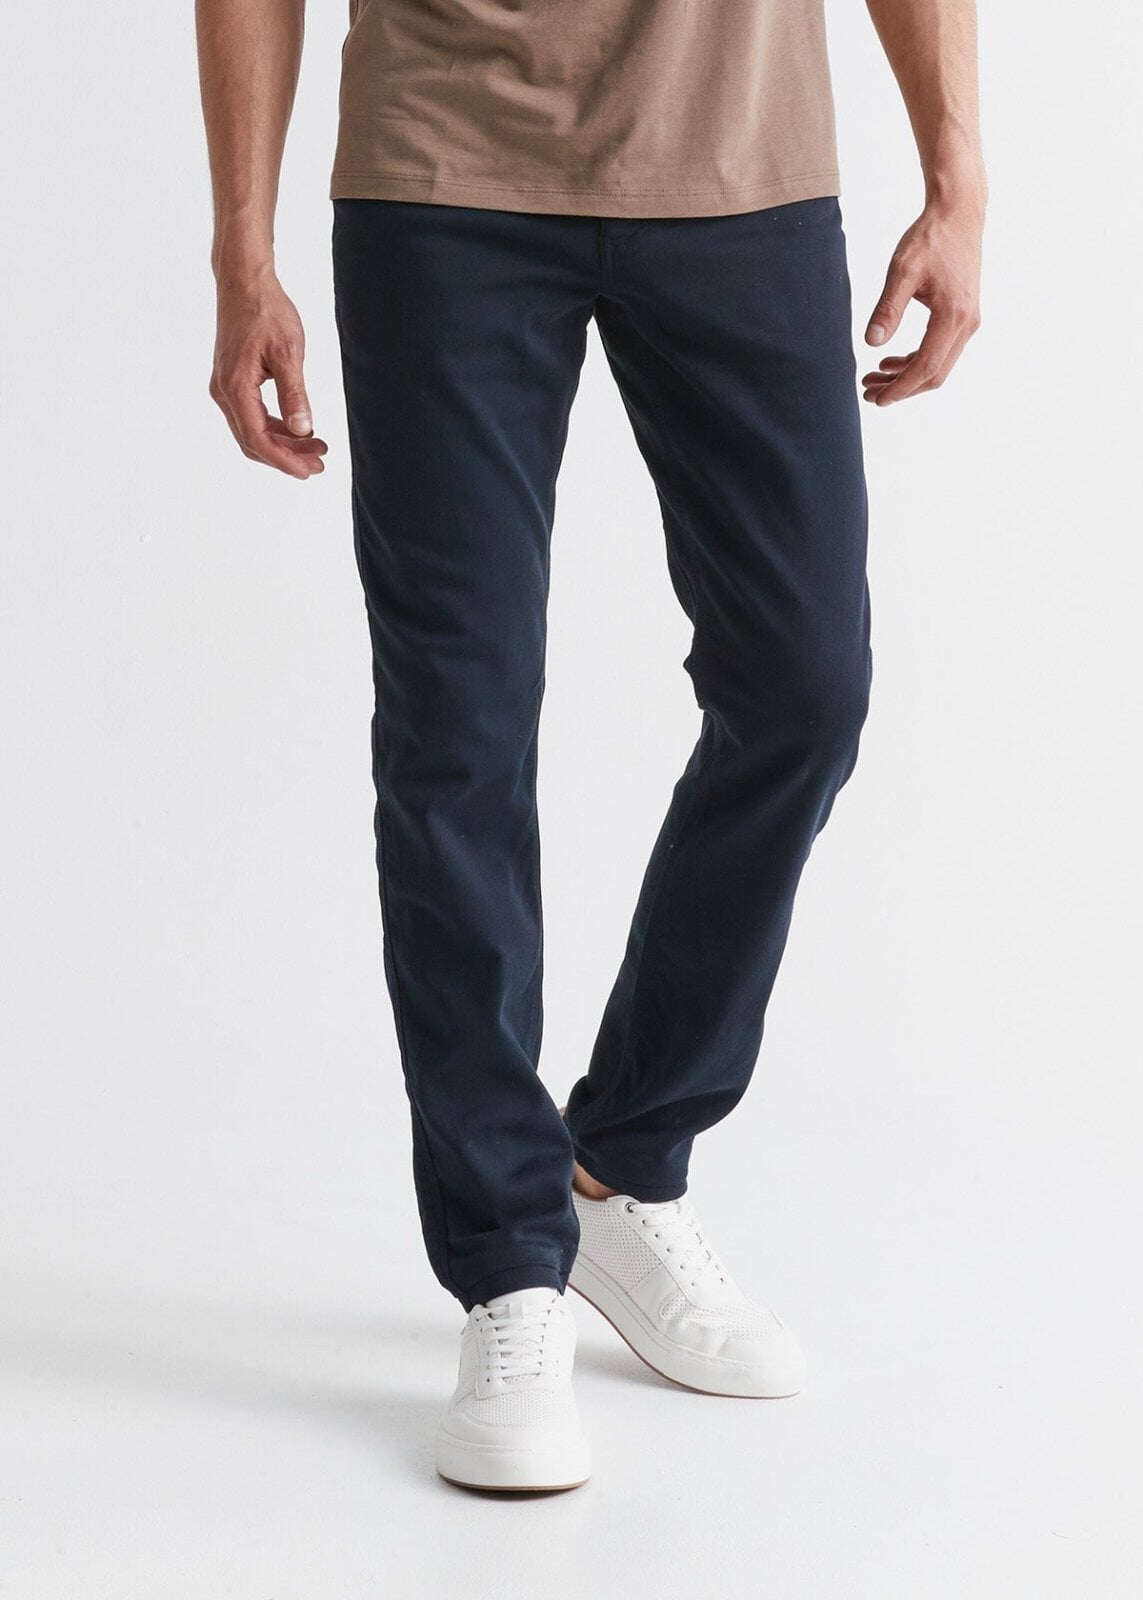 No Sweat Relaxed Fit Tapered Pants - Men's